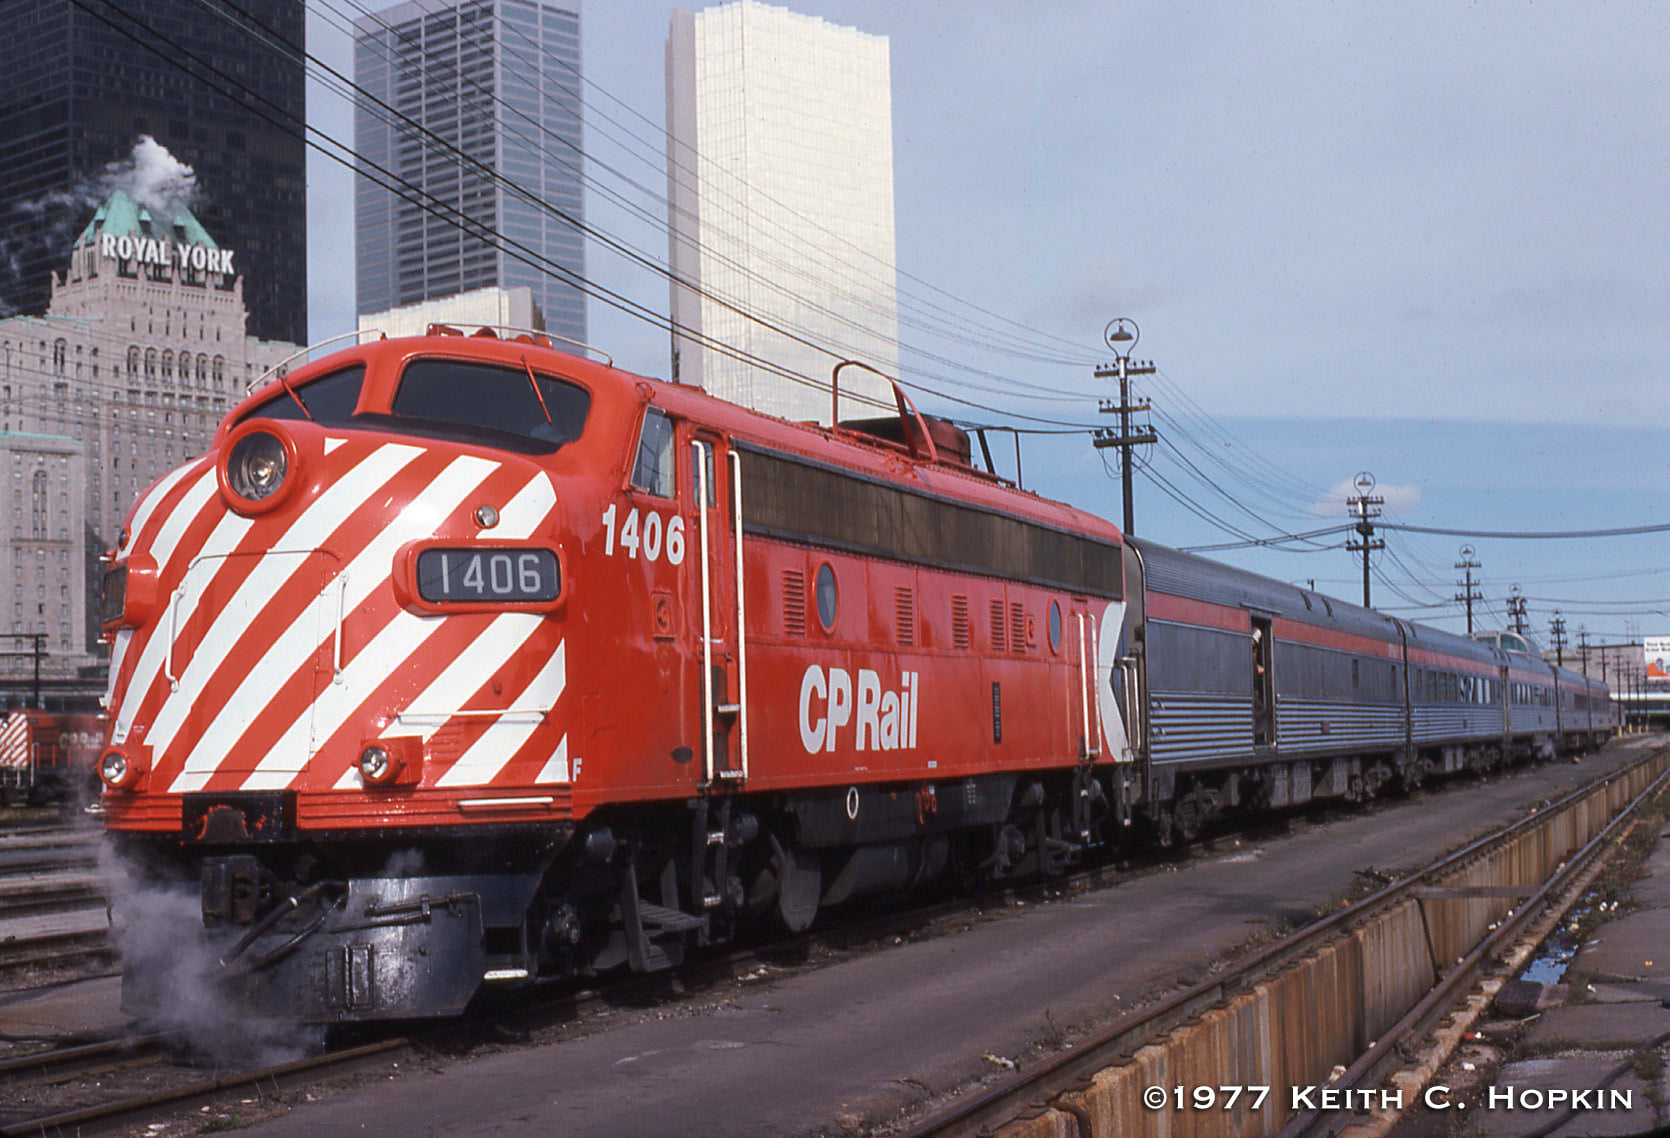 The Canadian' parked in Toronto, Oct. 1977.